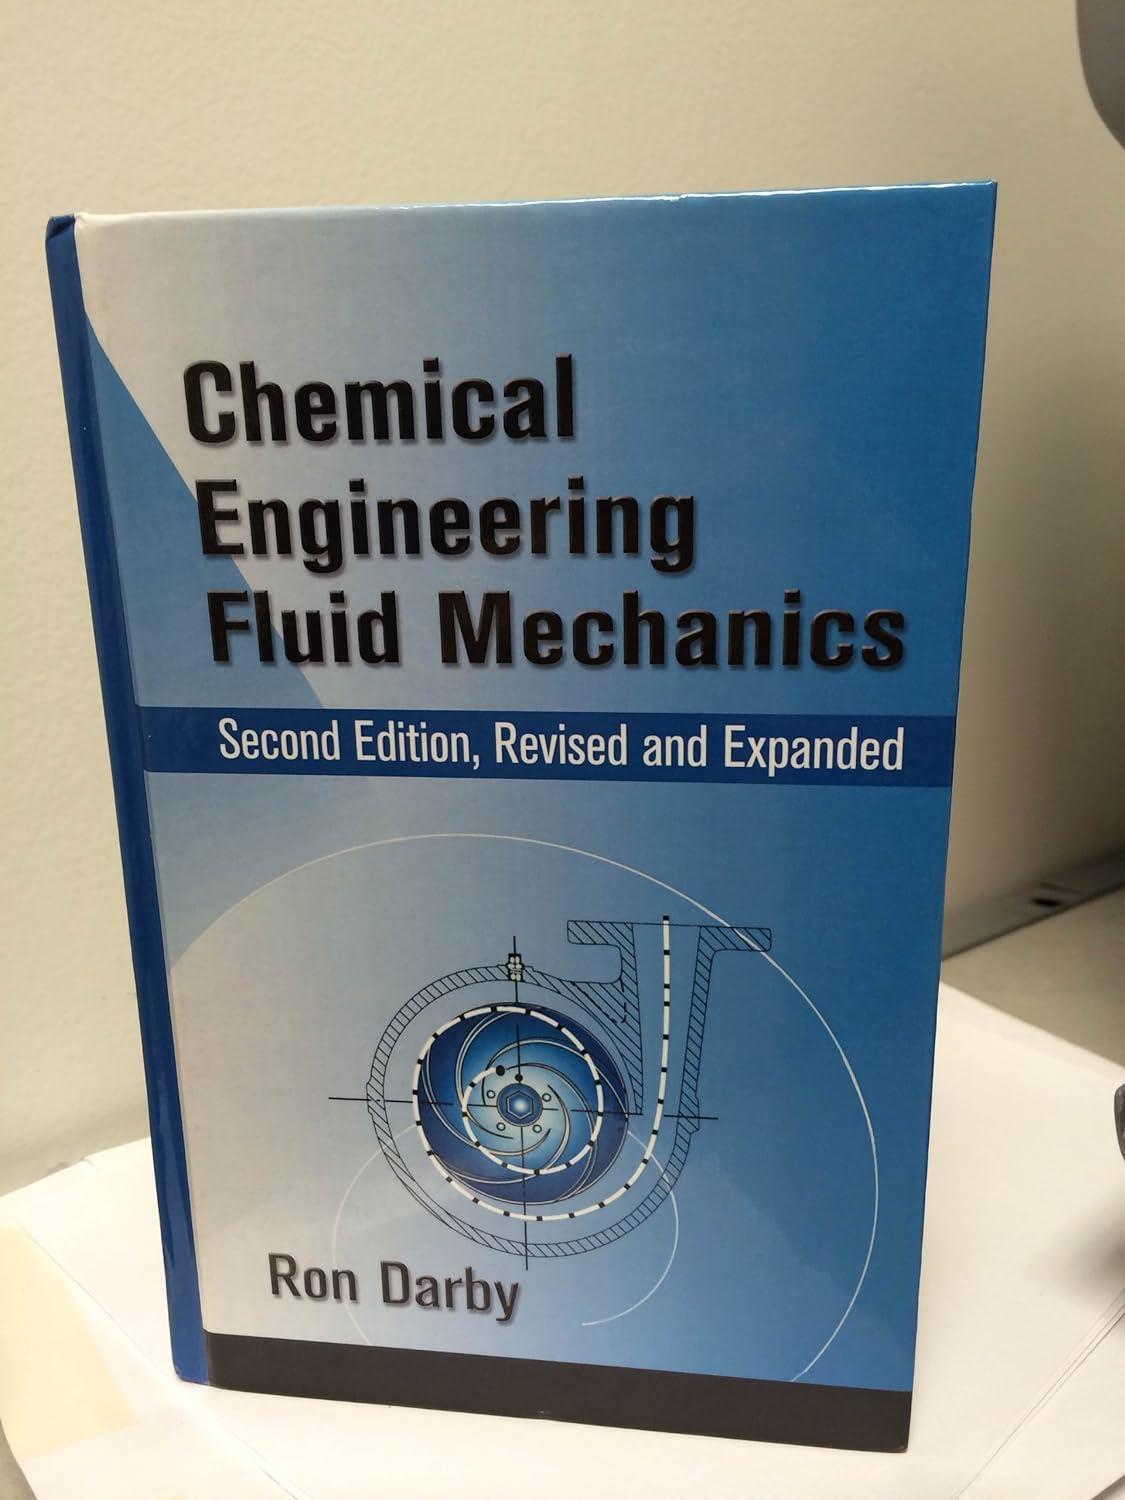 chemical engineering fluid mechanics revised and expanded 2nd edition ronald darby, ron darby,raj p. chhabra